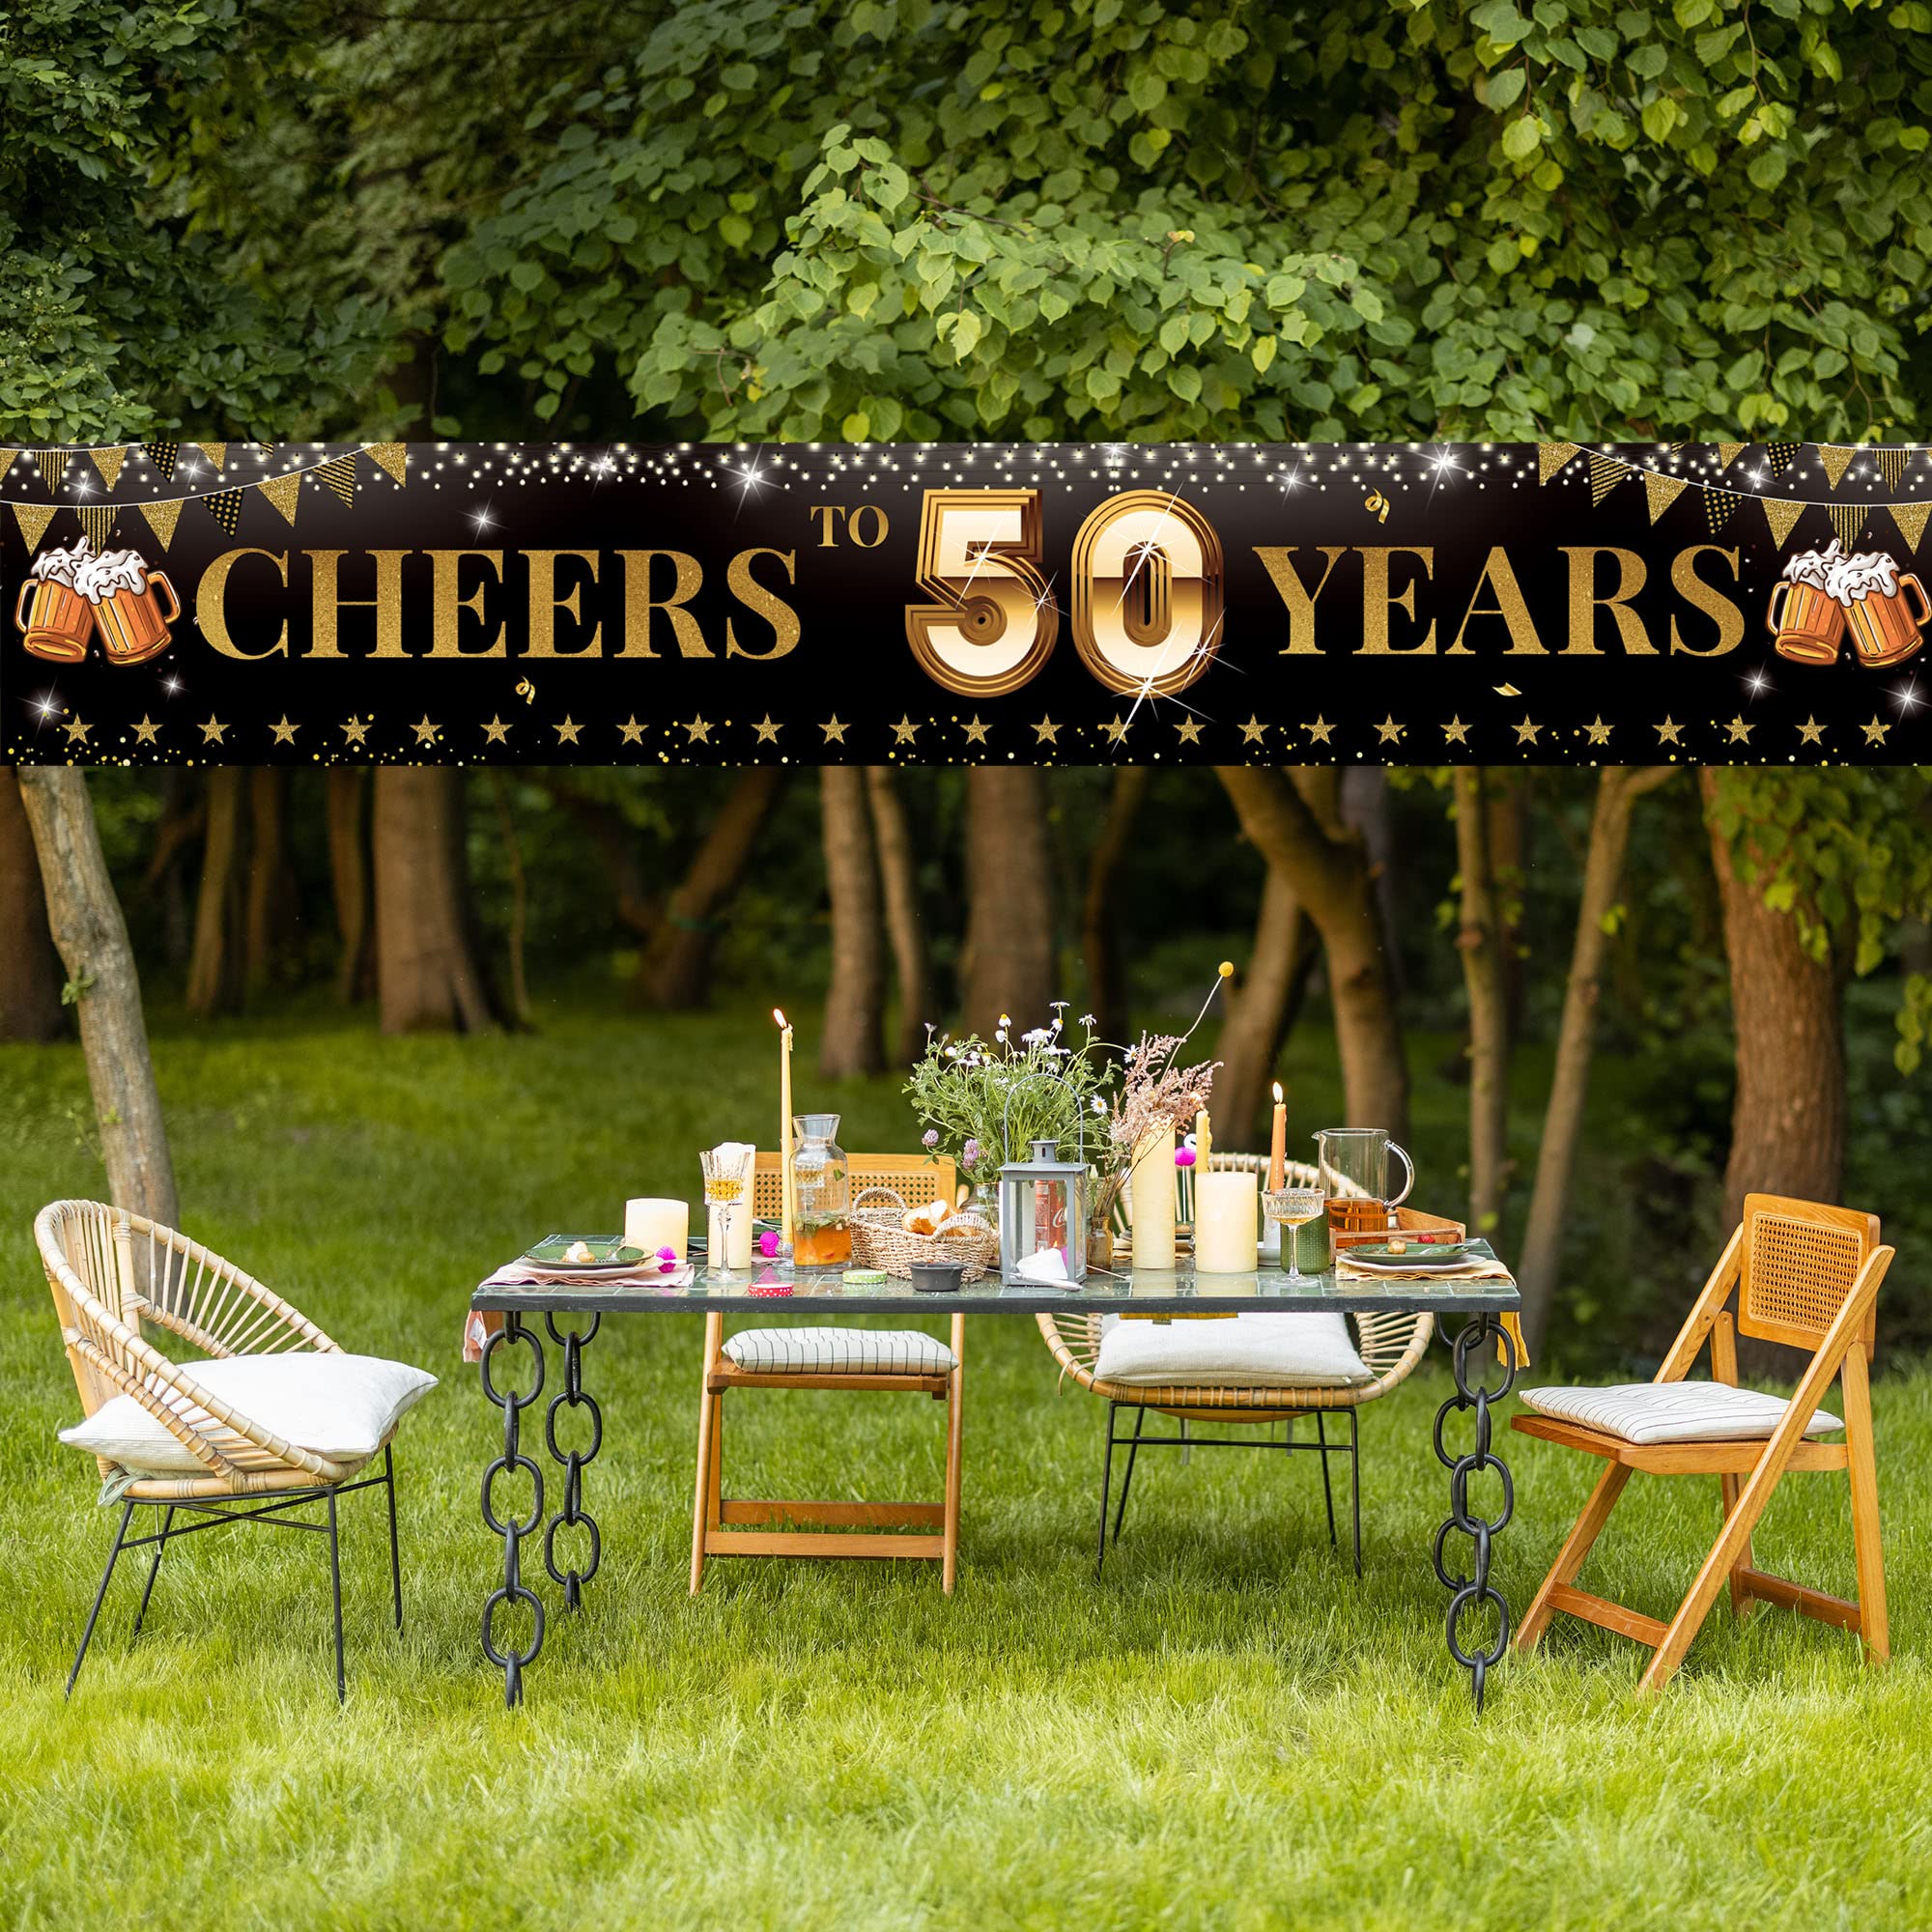 Cheers to 50 Years Yard Sign Banner, Happy 50th Birthday Decorations for Men Women, 50th Anniversary, Reunion Decorations, Black Gold 50 Years Celebration Party Decor for Outdoor Indoor, Vicycaty